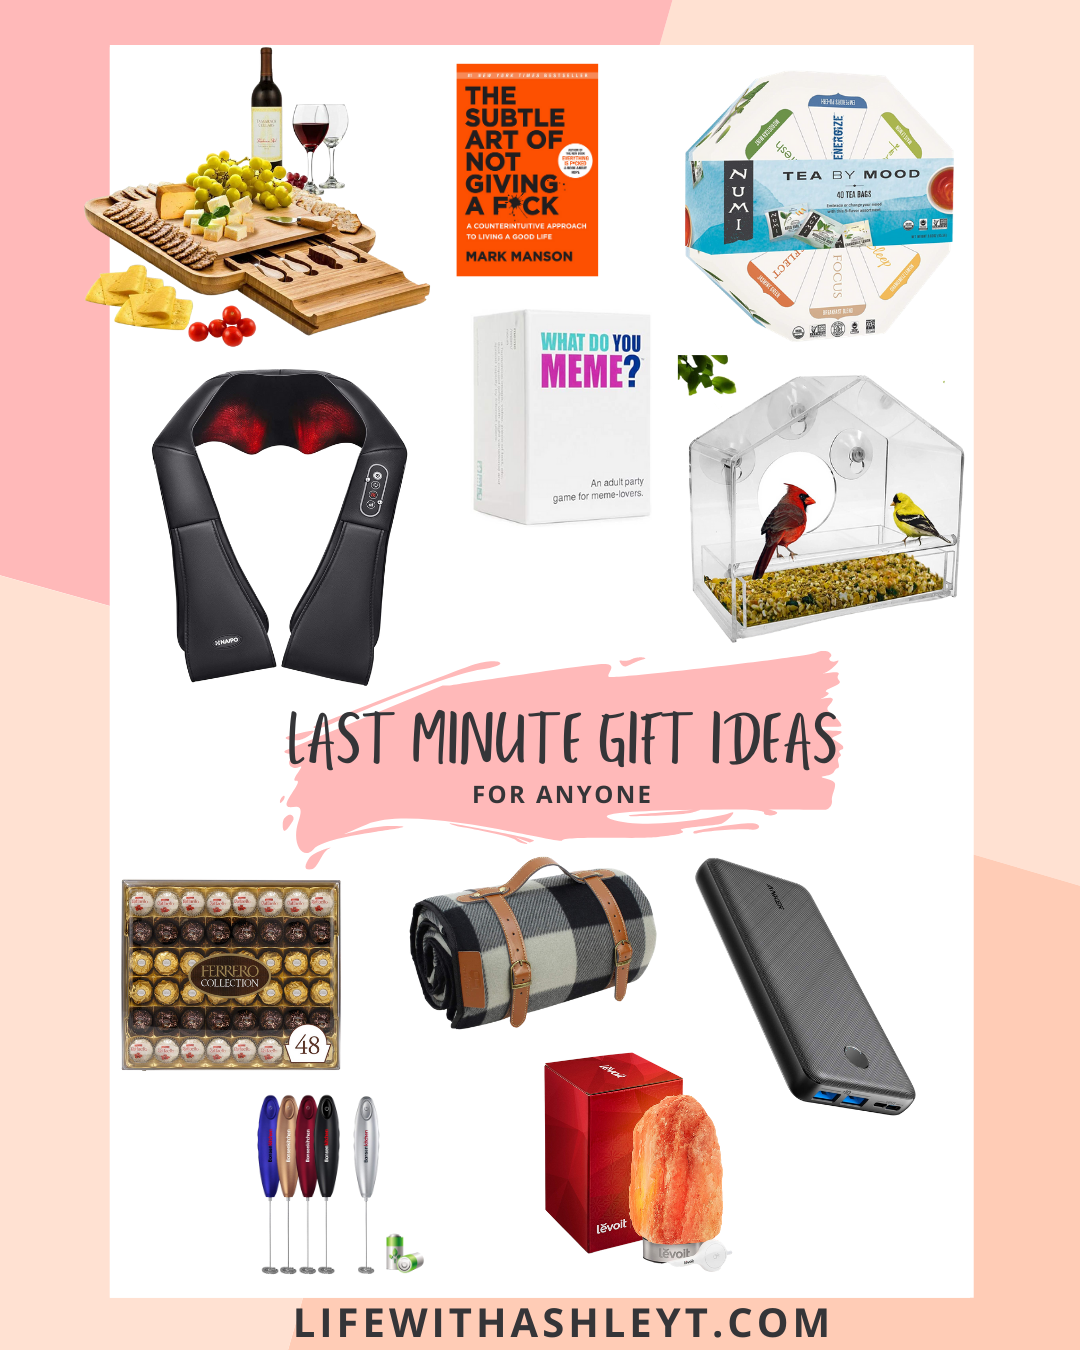 Last Minute Gift Ideas - Beauty With Lily